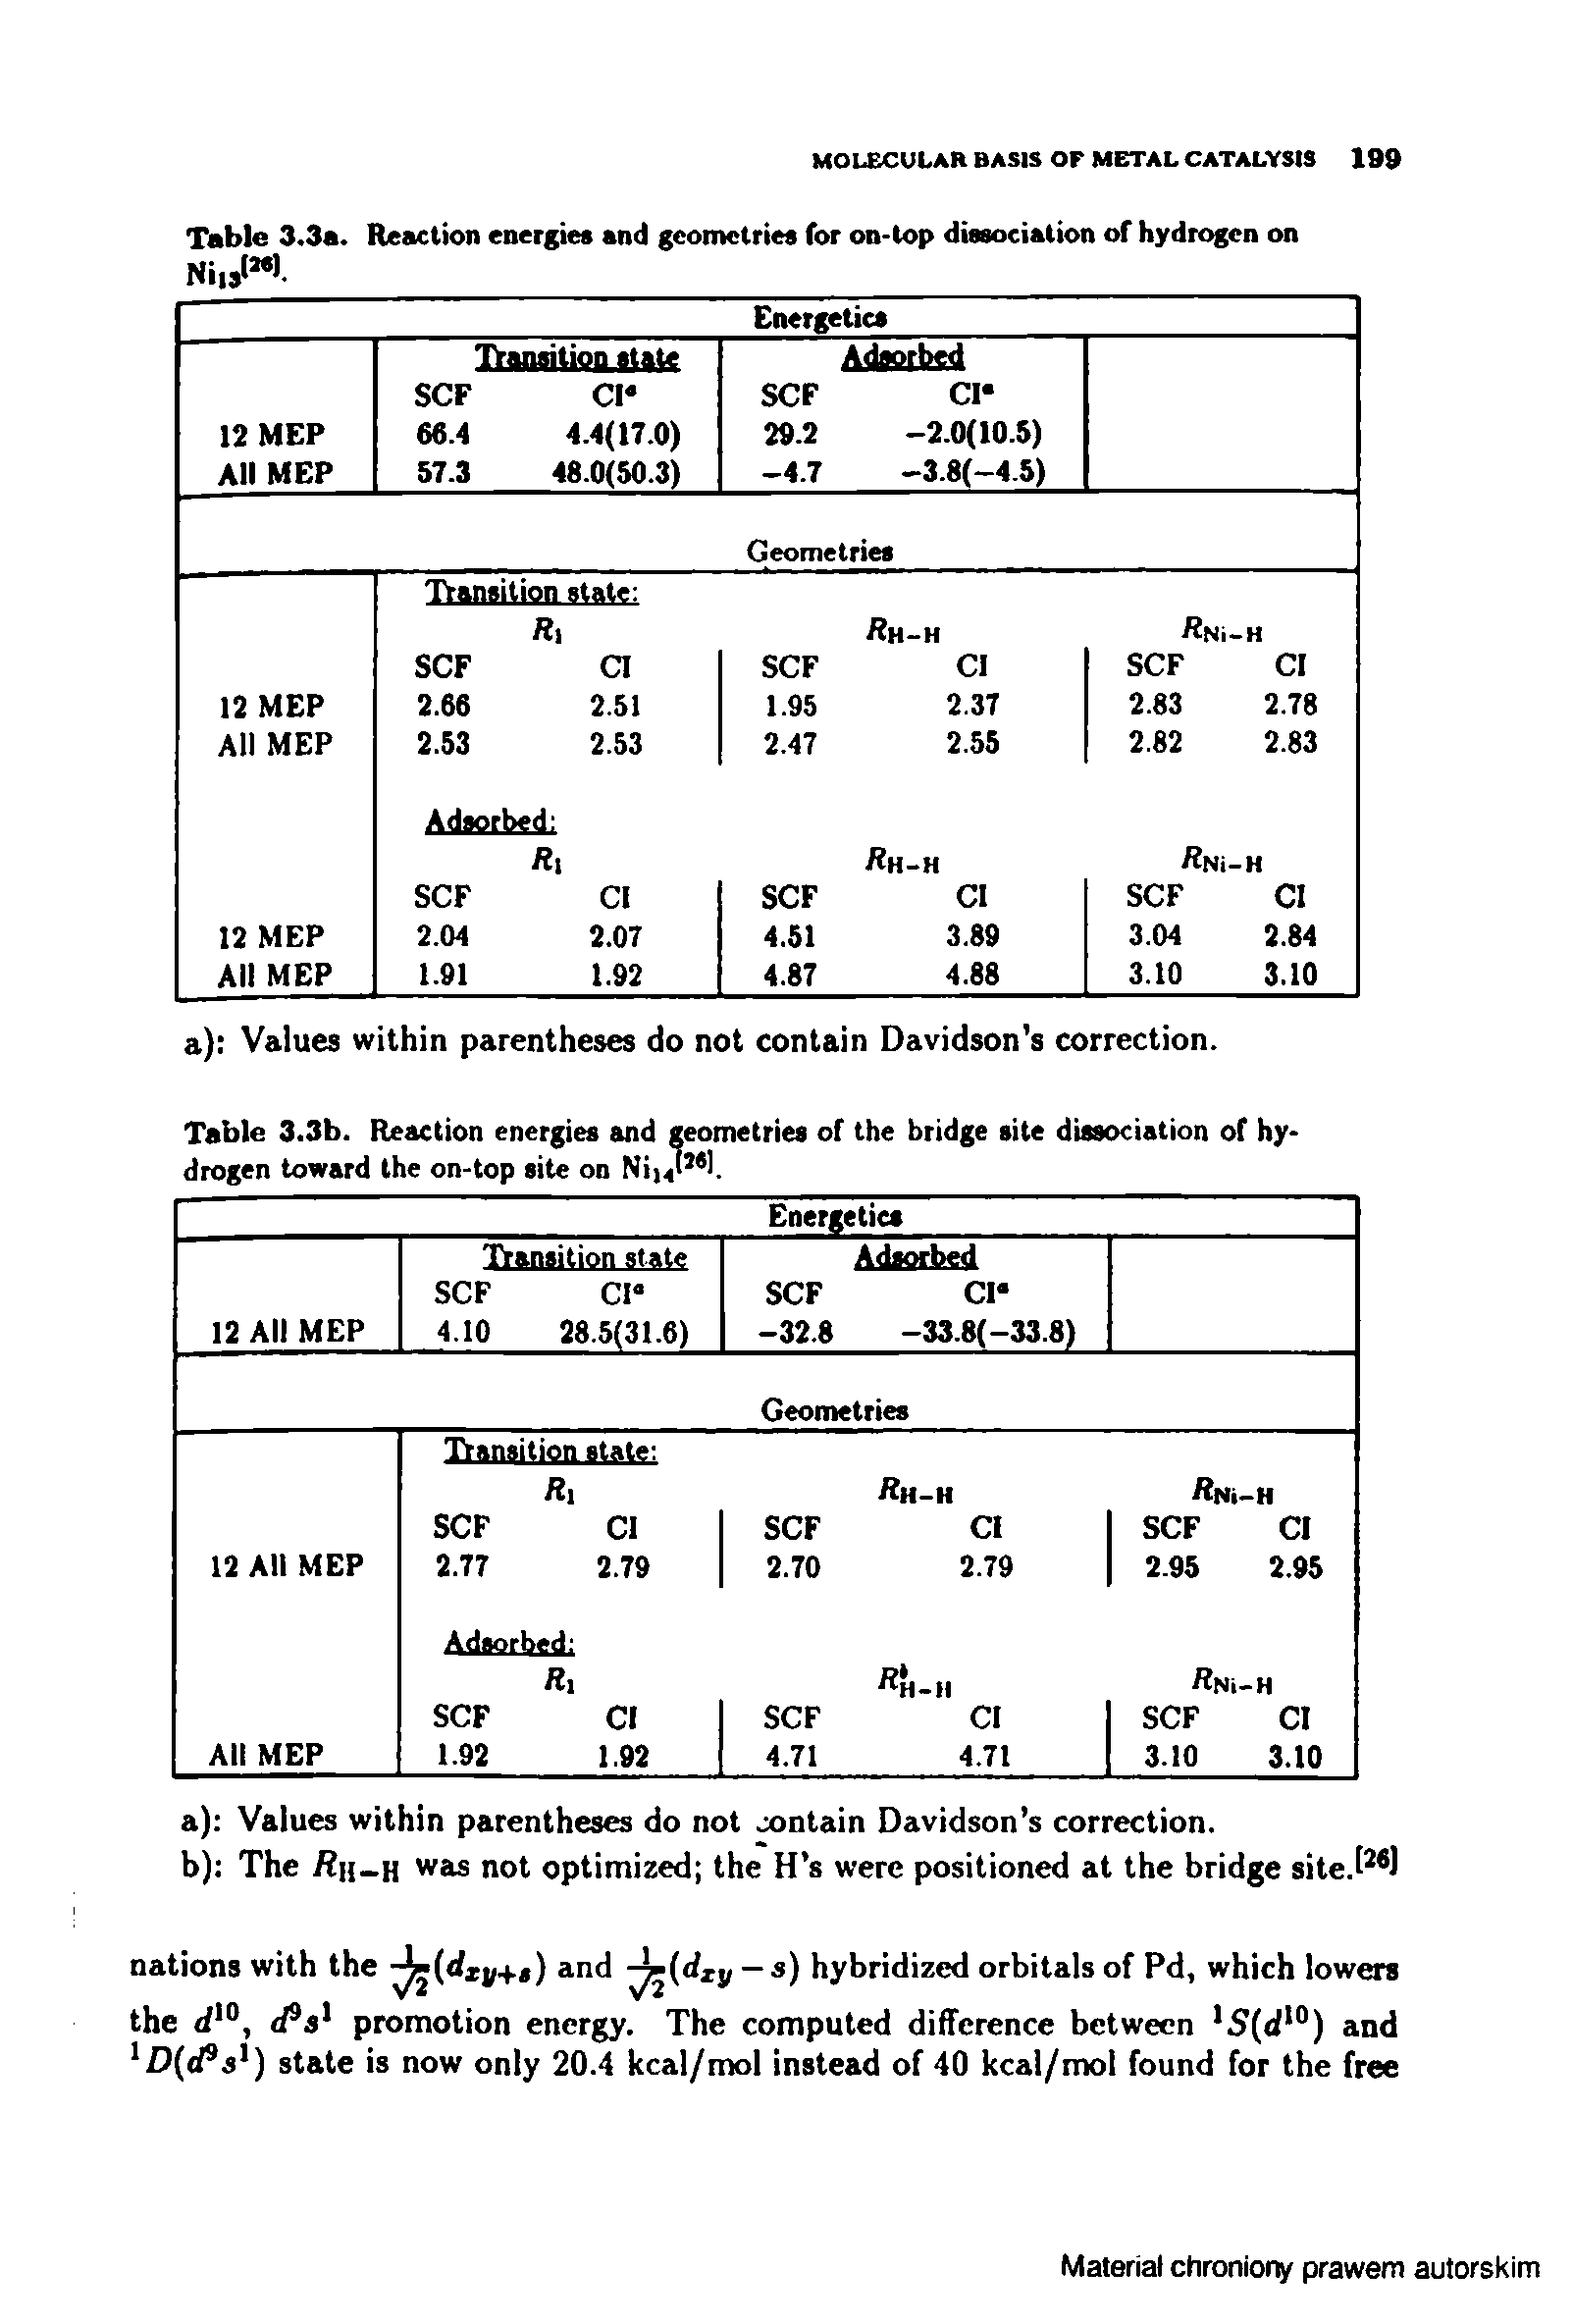 Table 3.3a. Reaction energies and geometries for on-top dissociation of hydrogen on Niis( >.